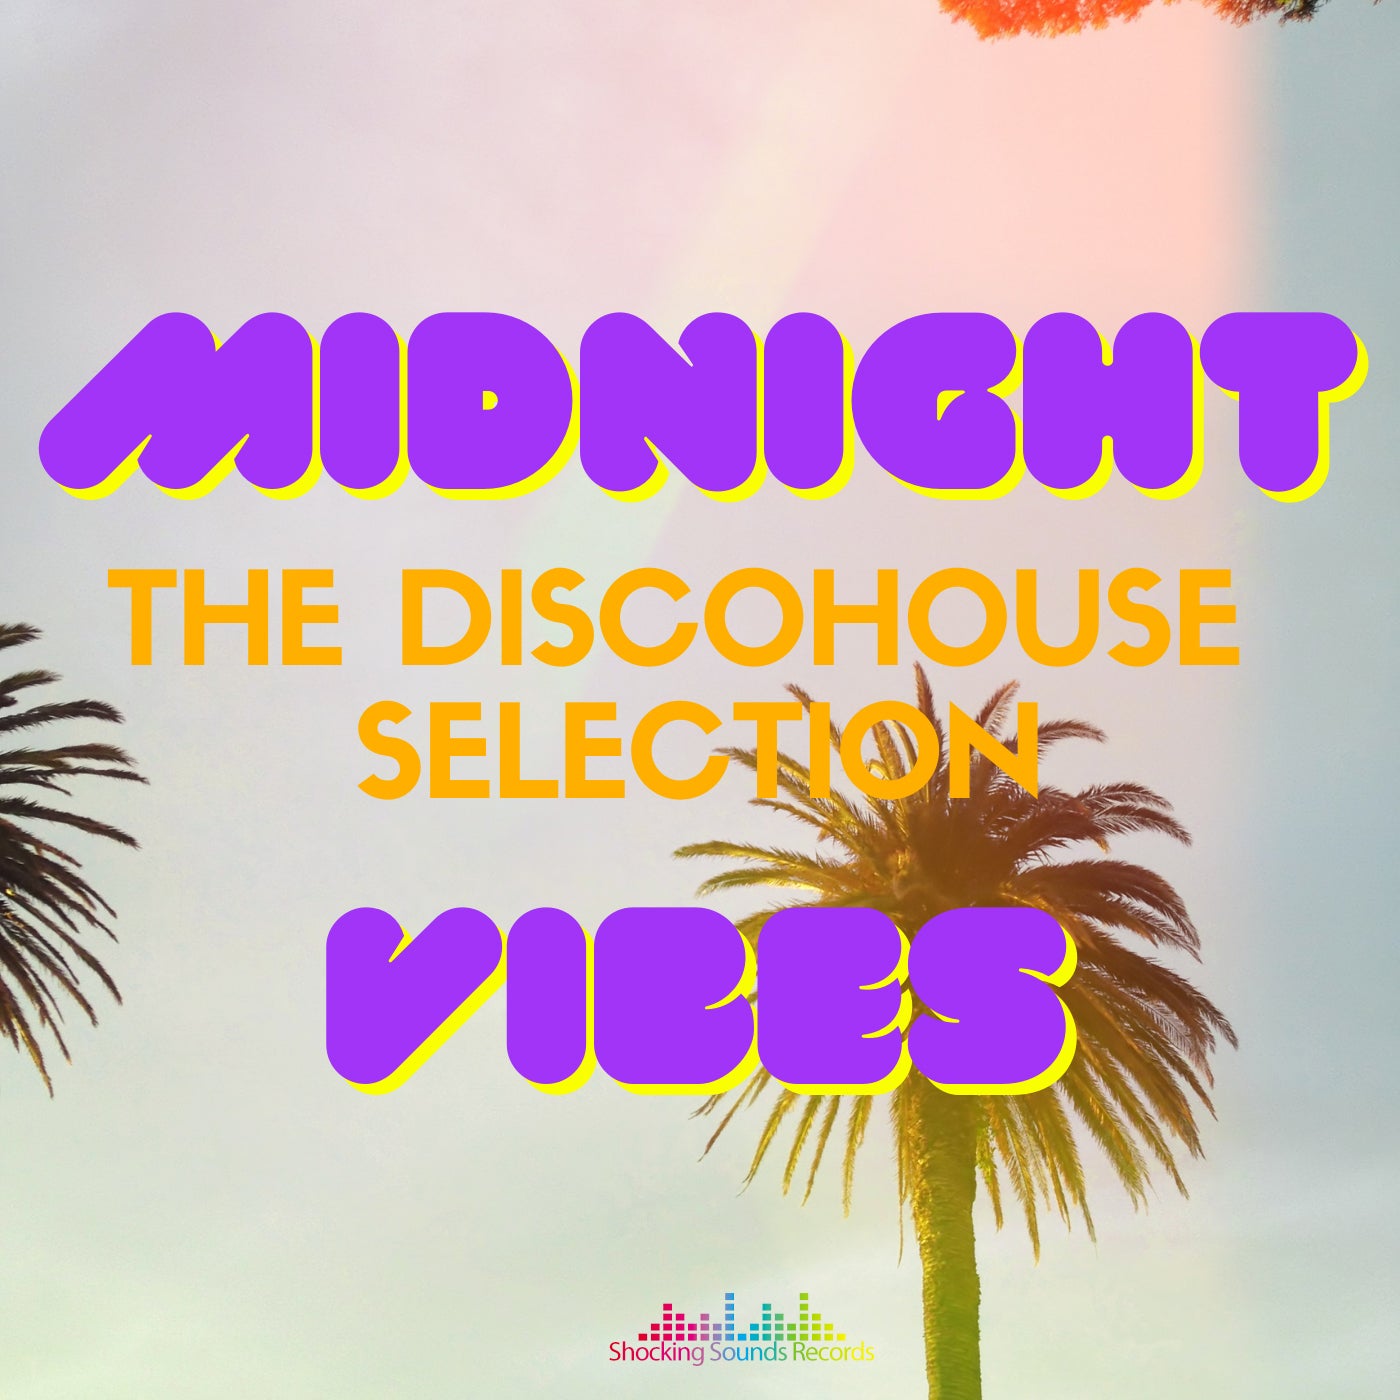 Midnight Vibes: The Disco House Selection